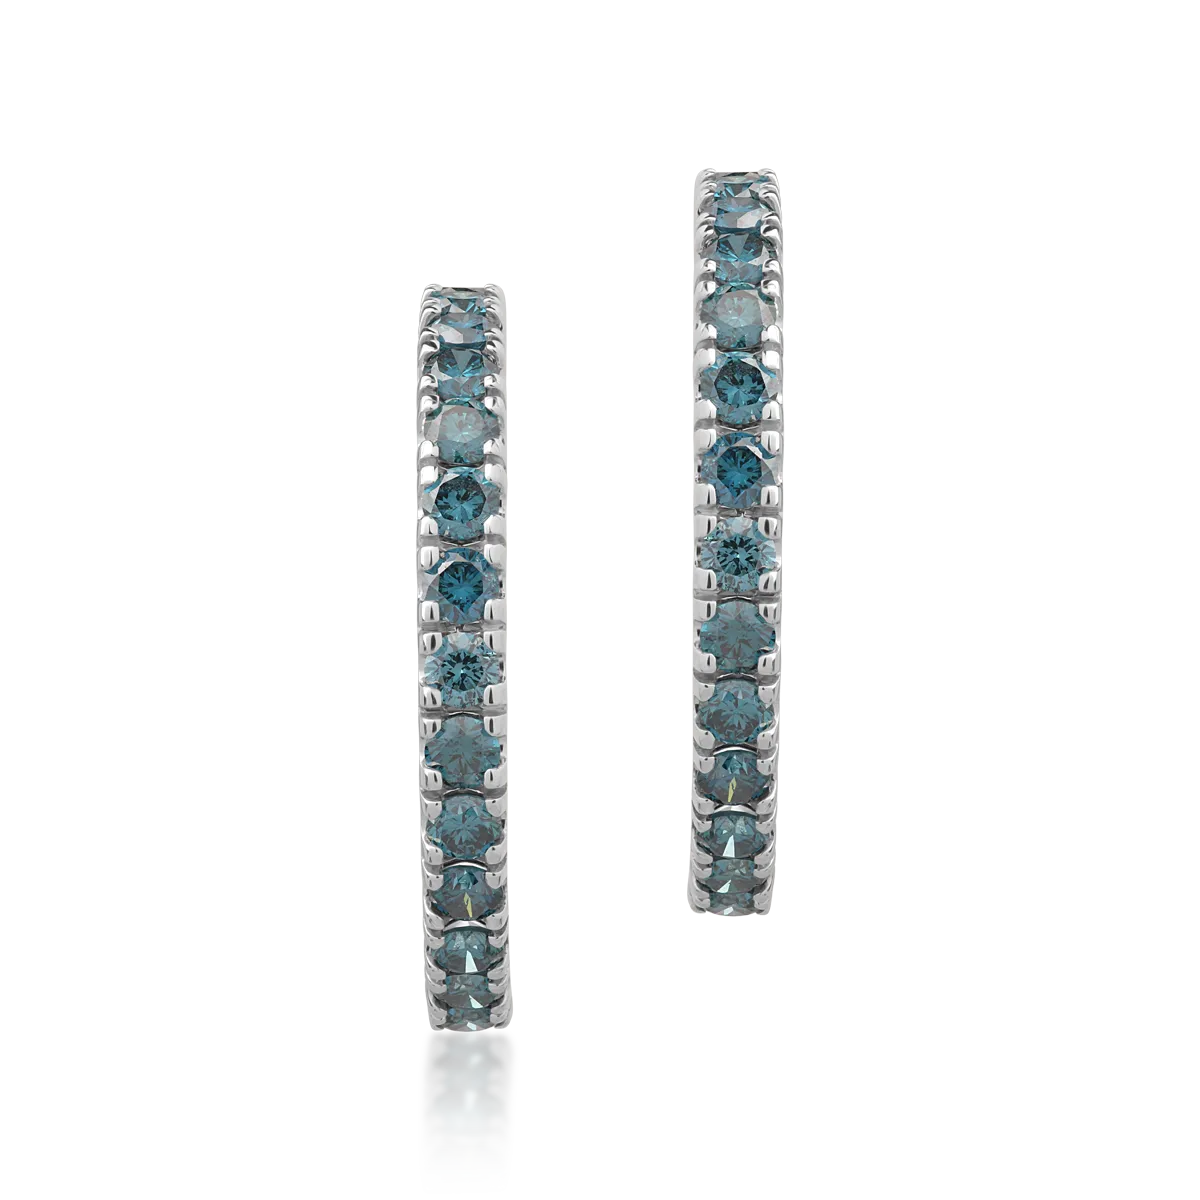 18K white gold earrings with 1.1ct blue diamonds